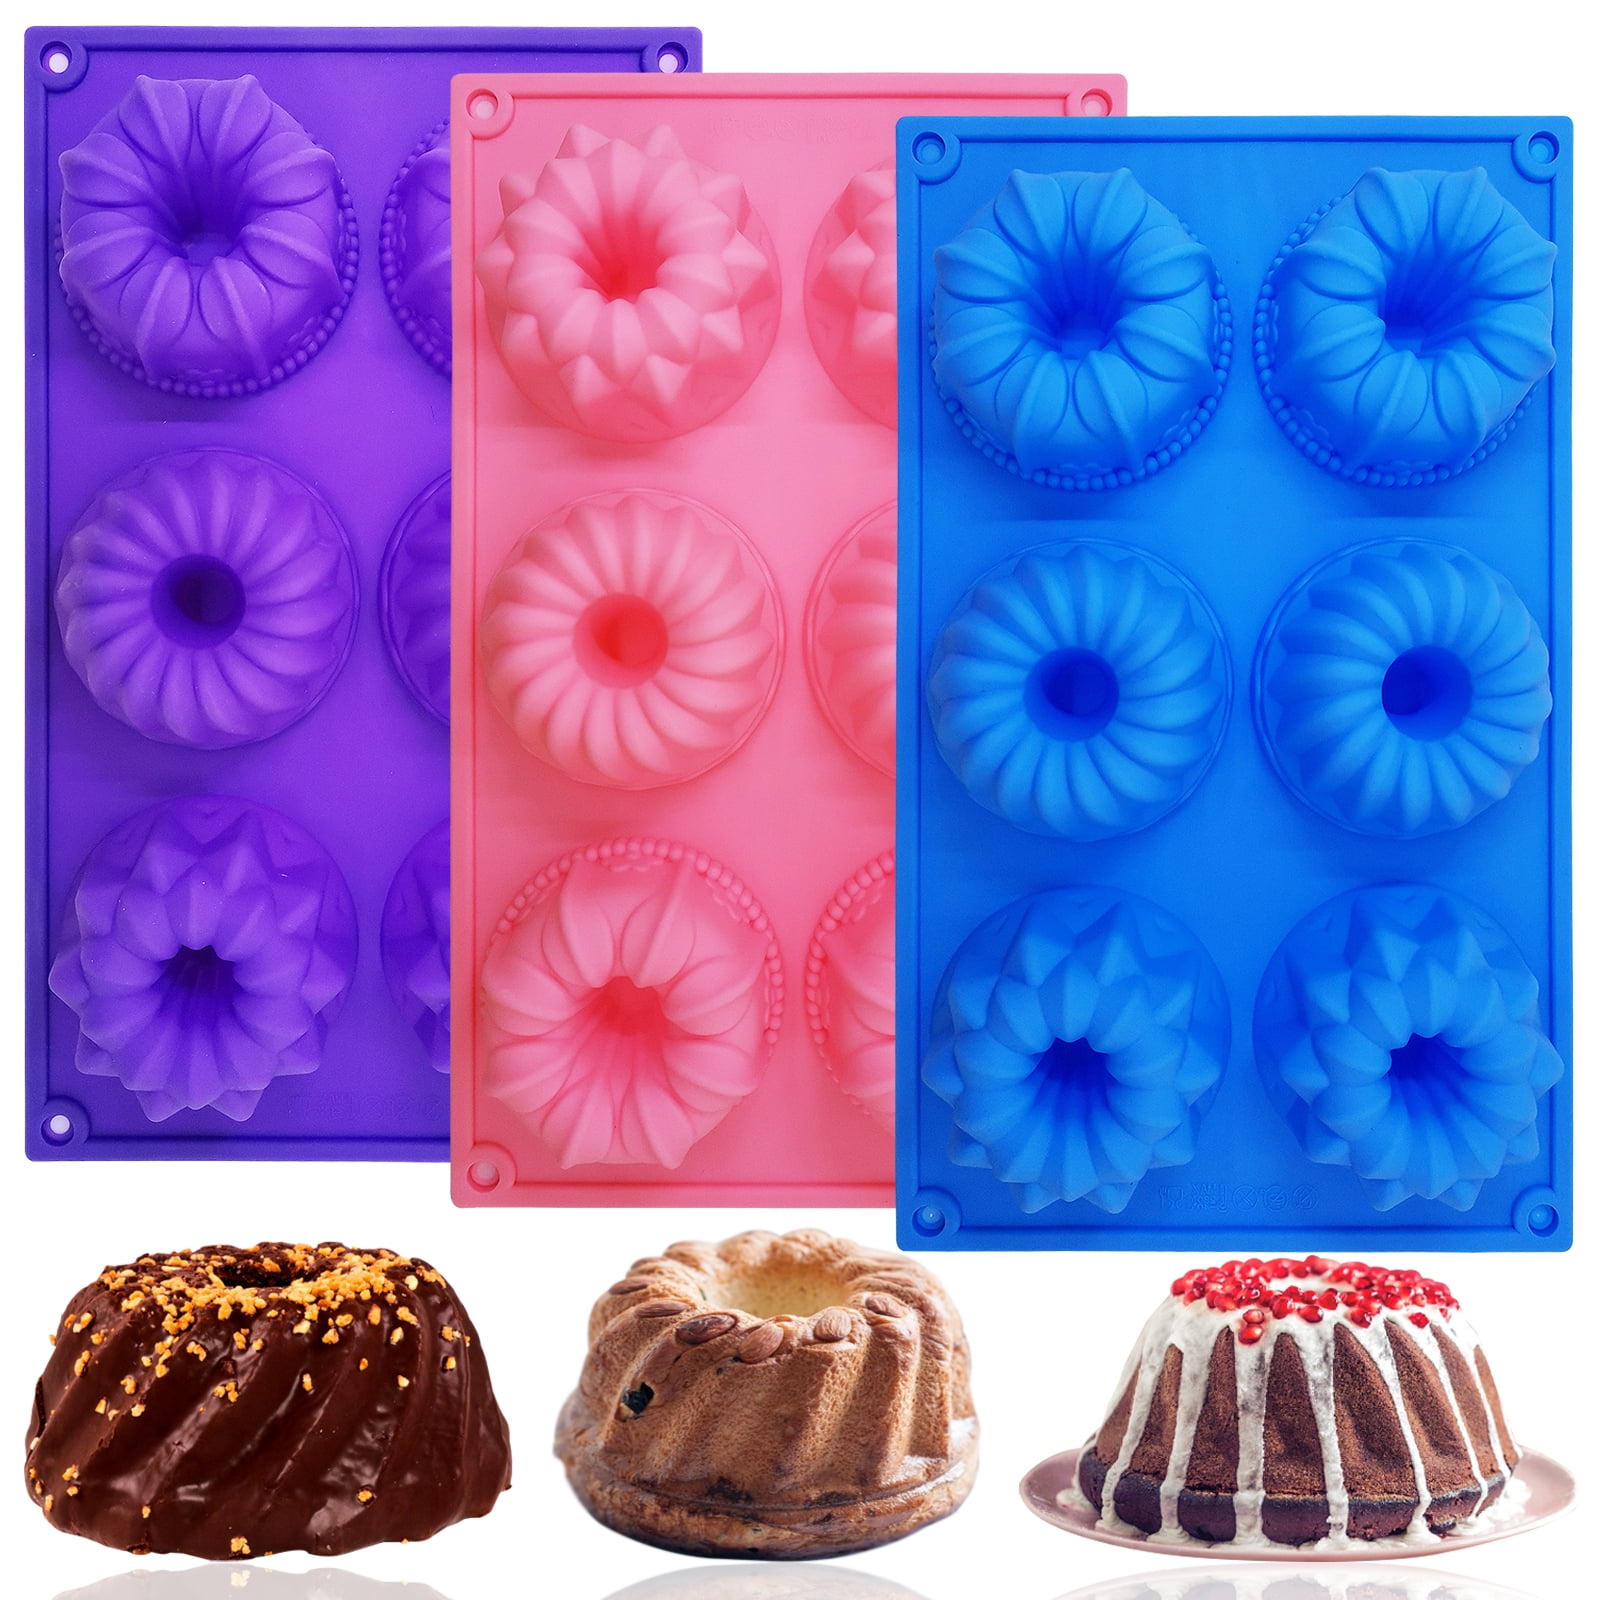 Details about   Xmas Mold Pastry Baking Cooking Decorations Spring Pressed Moulds Cake Q2T9 